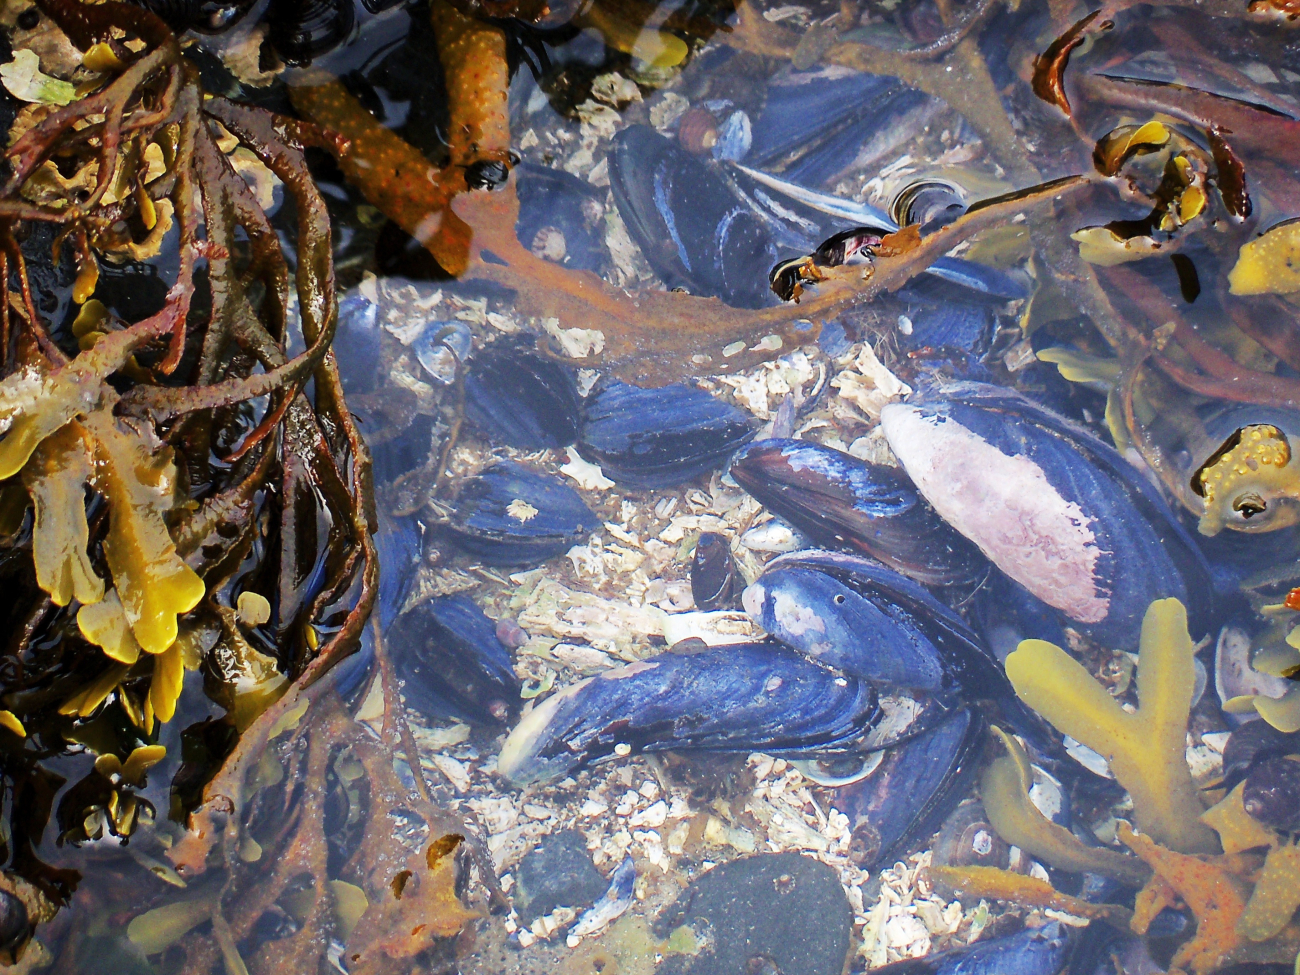 Tide pool at Fort Abercrombie State Park with large mussels, limpets, oliveshells,  and algae